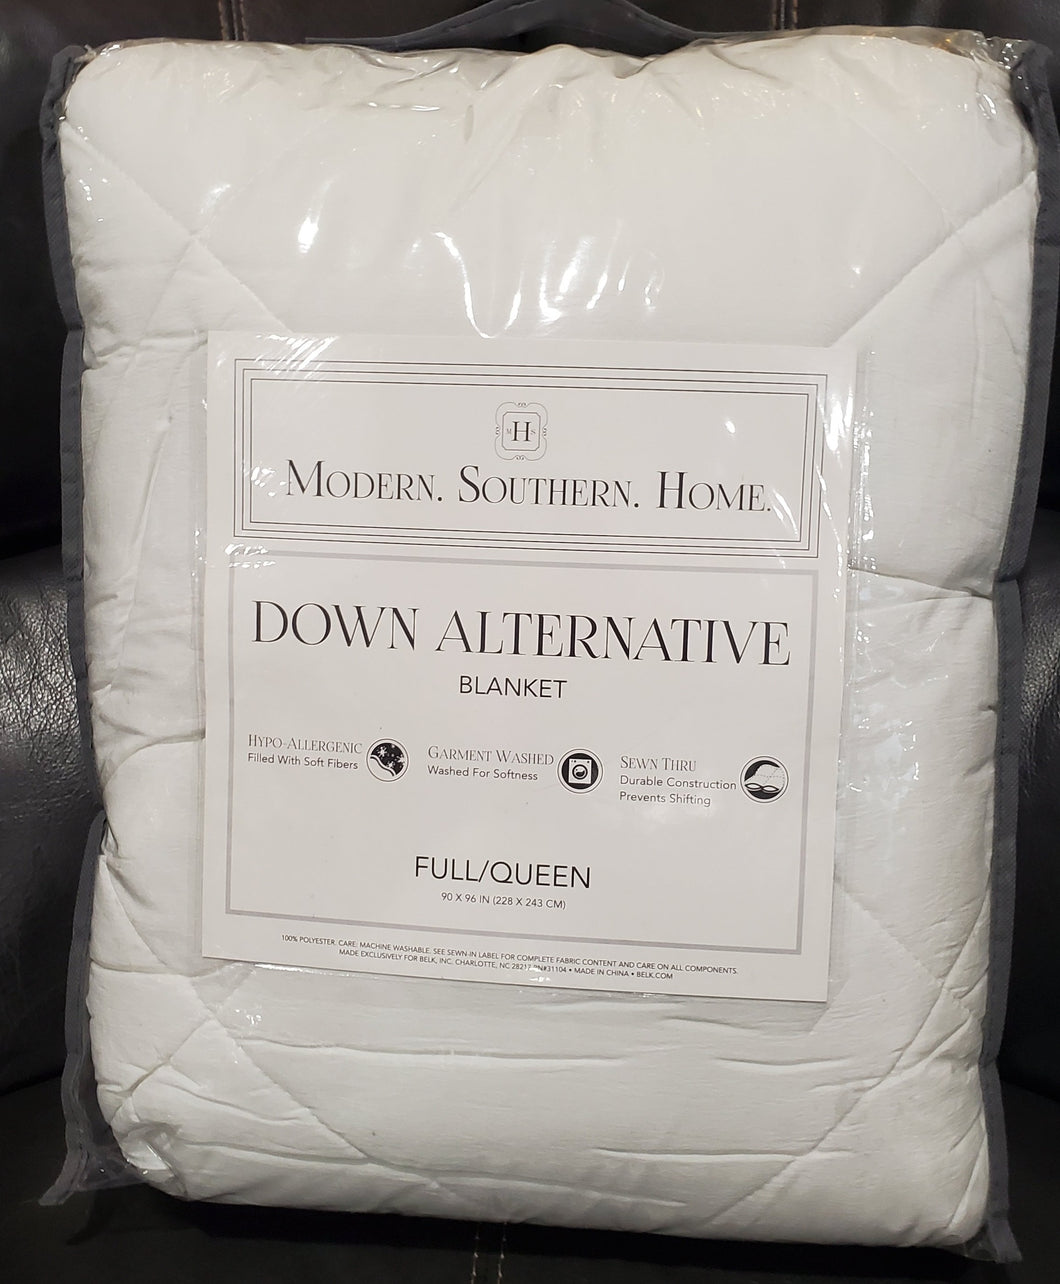 Modern. Southern. Home. Down Alternative Blanket, Garment Washed White, Full/Queen